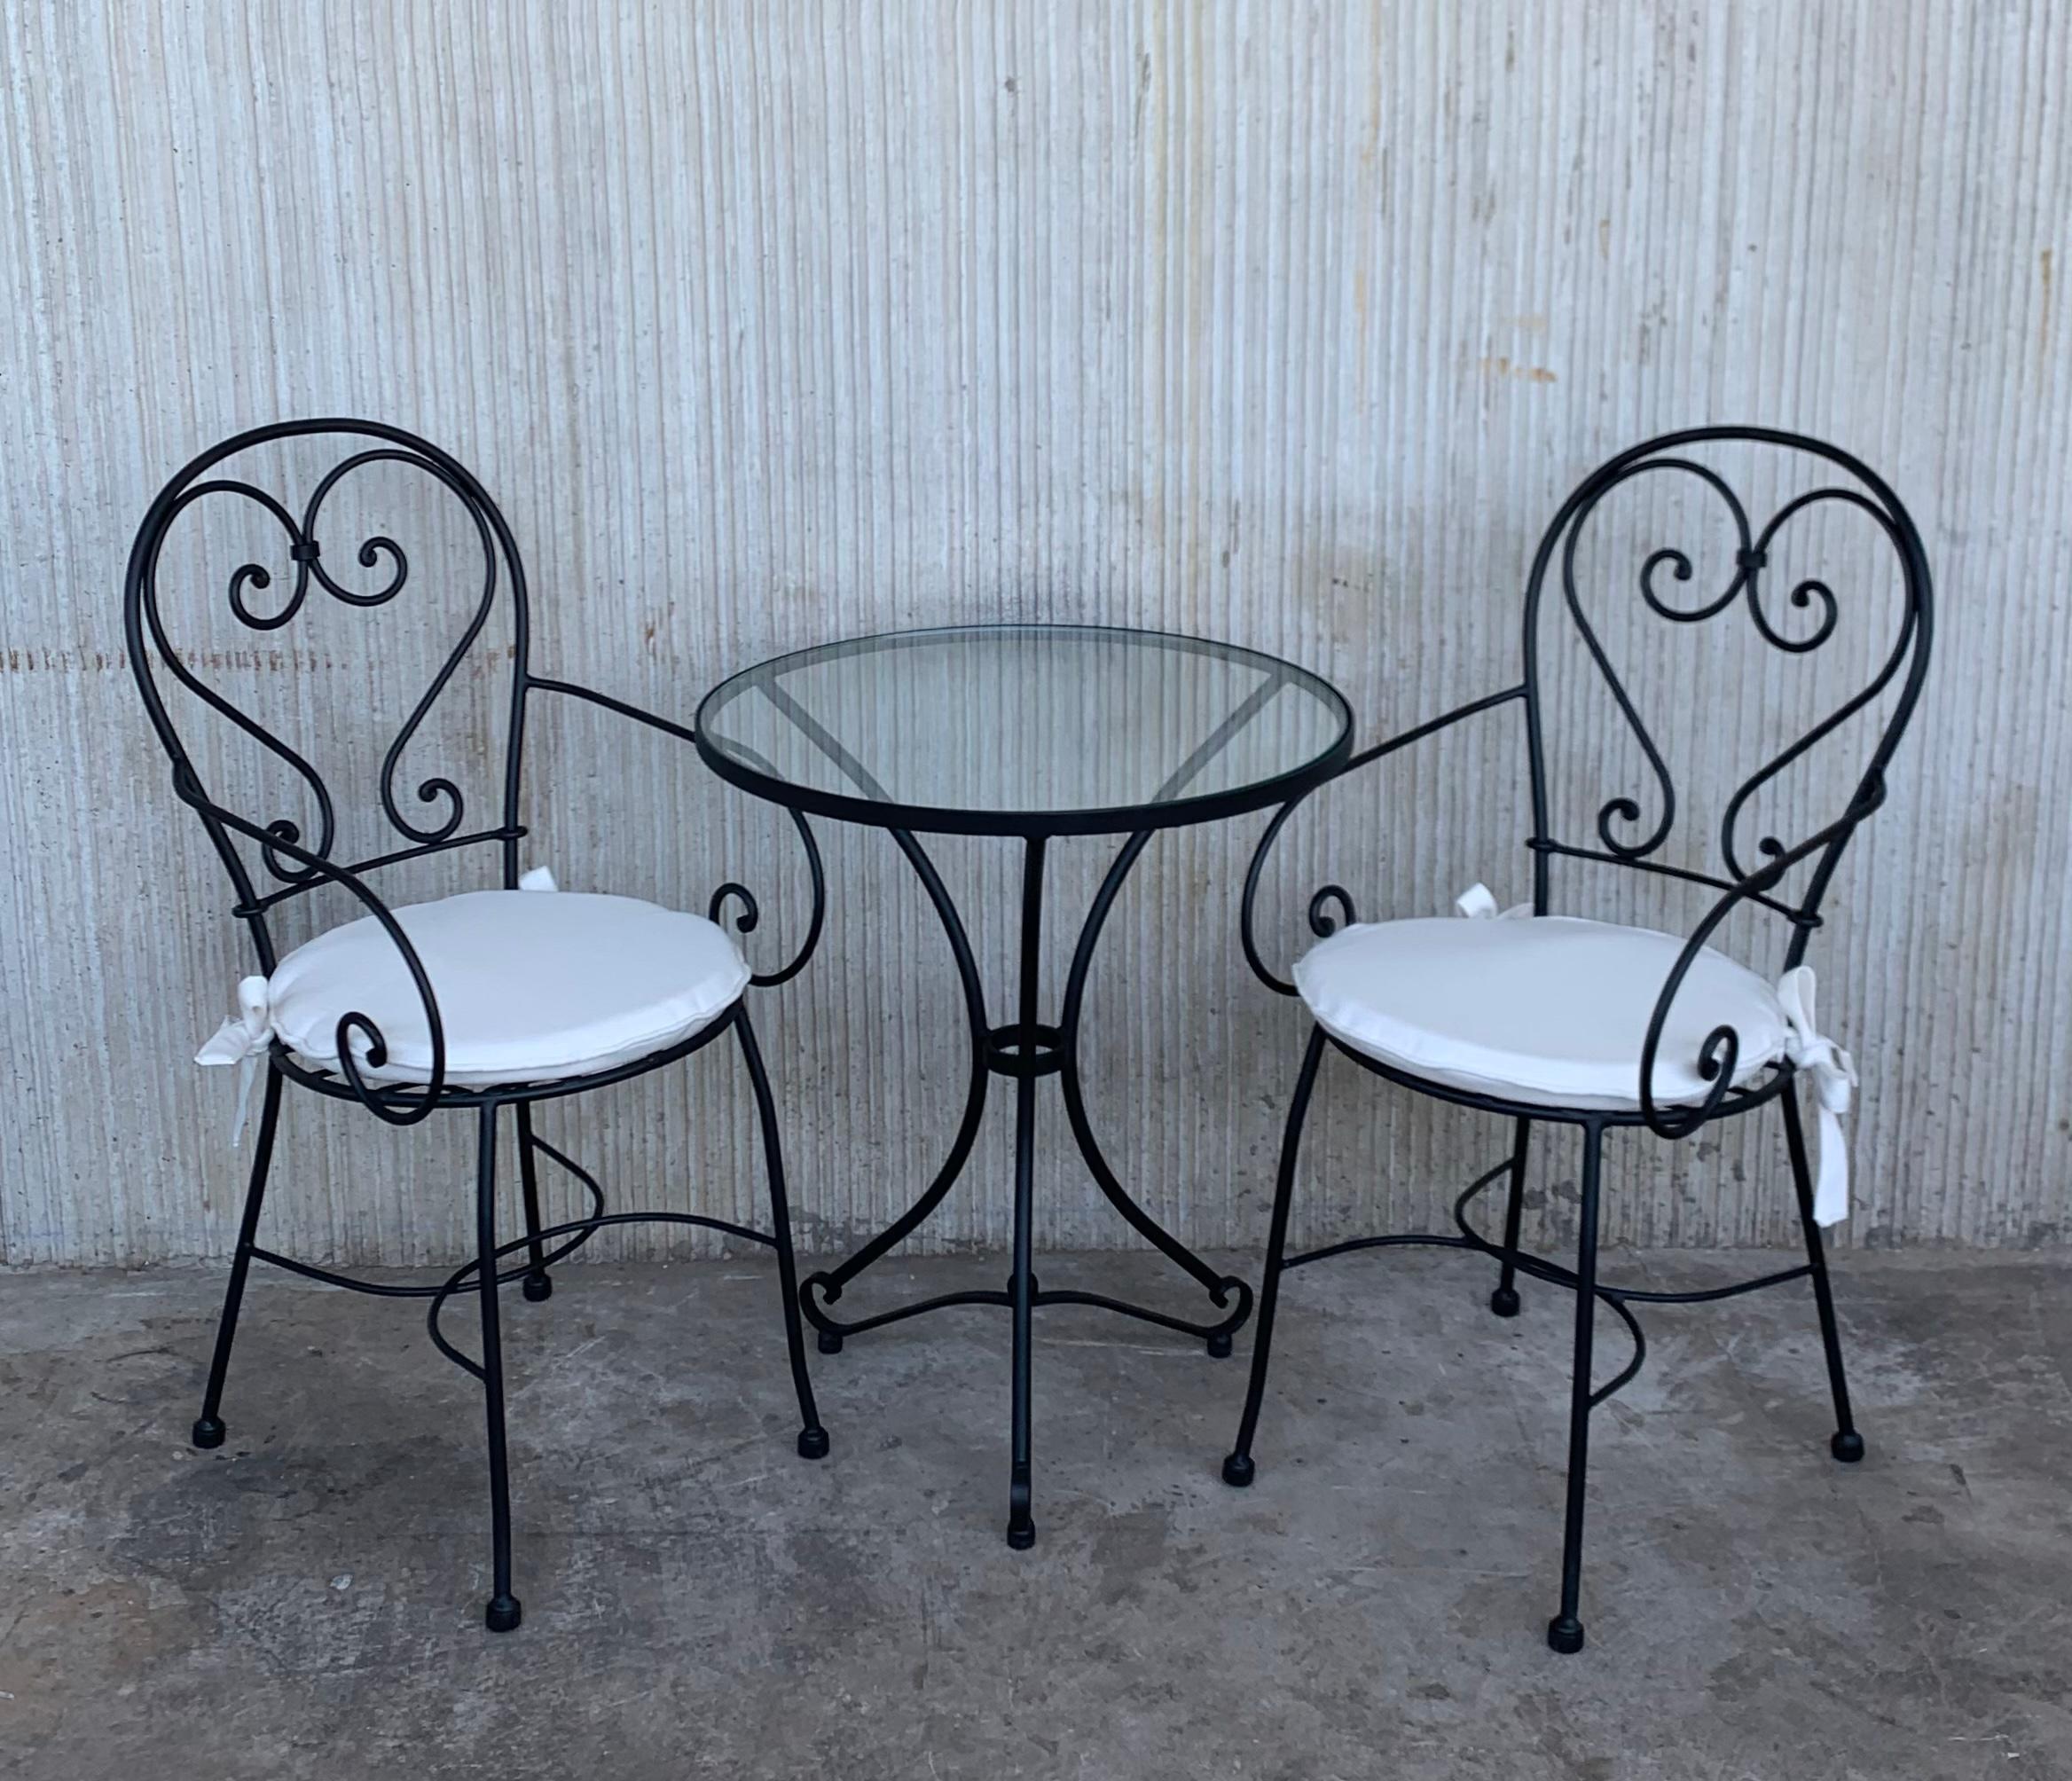 New French wrought iron painting garden bistro outdoor set

The price includes two armchairs with cushions and one top glass table. Available now in black.

If you want other combination you can choose colors and top finishes (wood, marble,